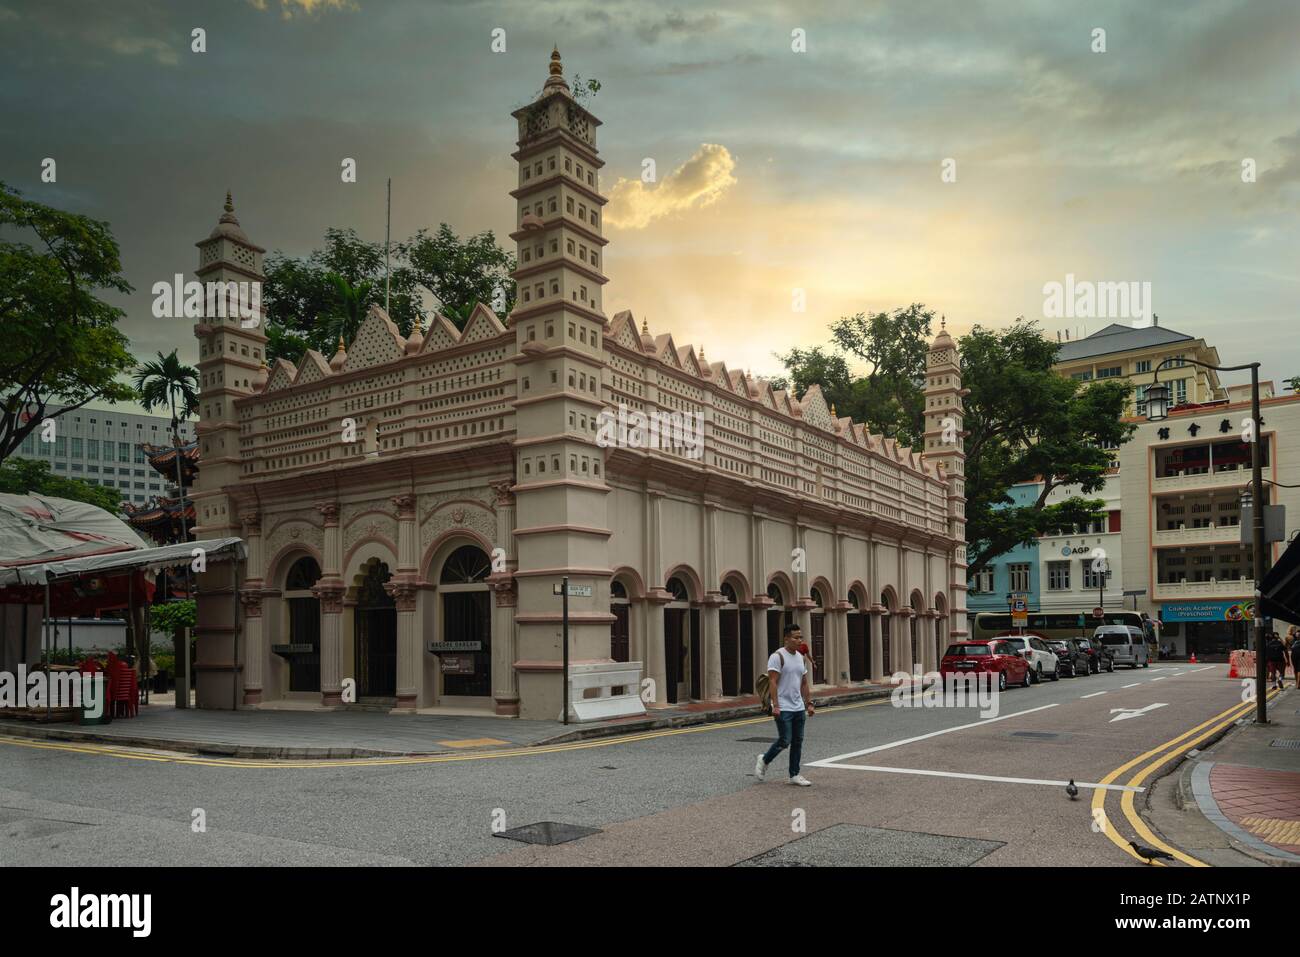 Singapore. January 2020.   The Nagore Durgha (or Nagore Dargah) is a shrine in Singapore built by Muslims from southern India between 1828 and 1830. Stock Photo